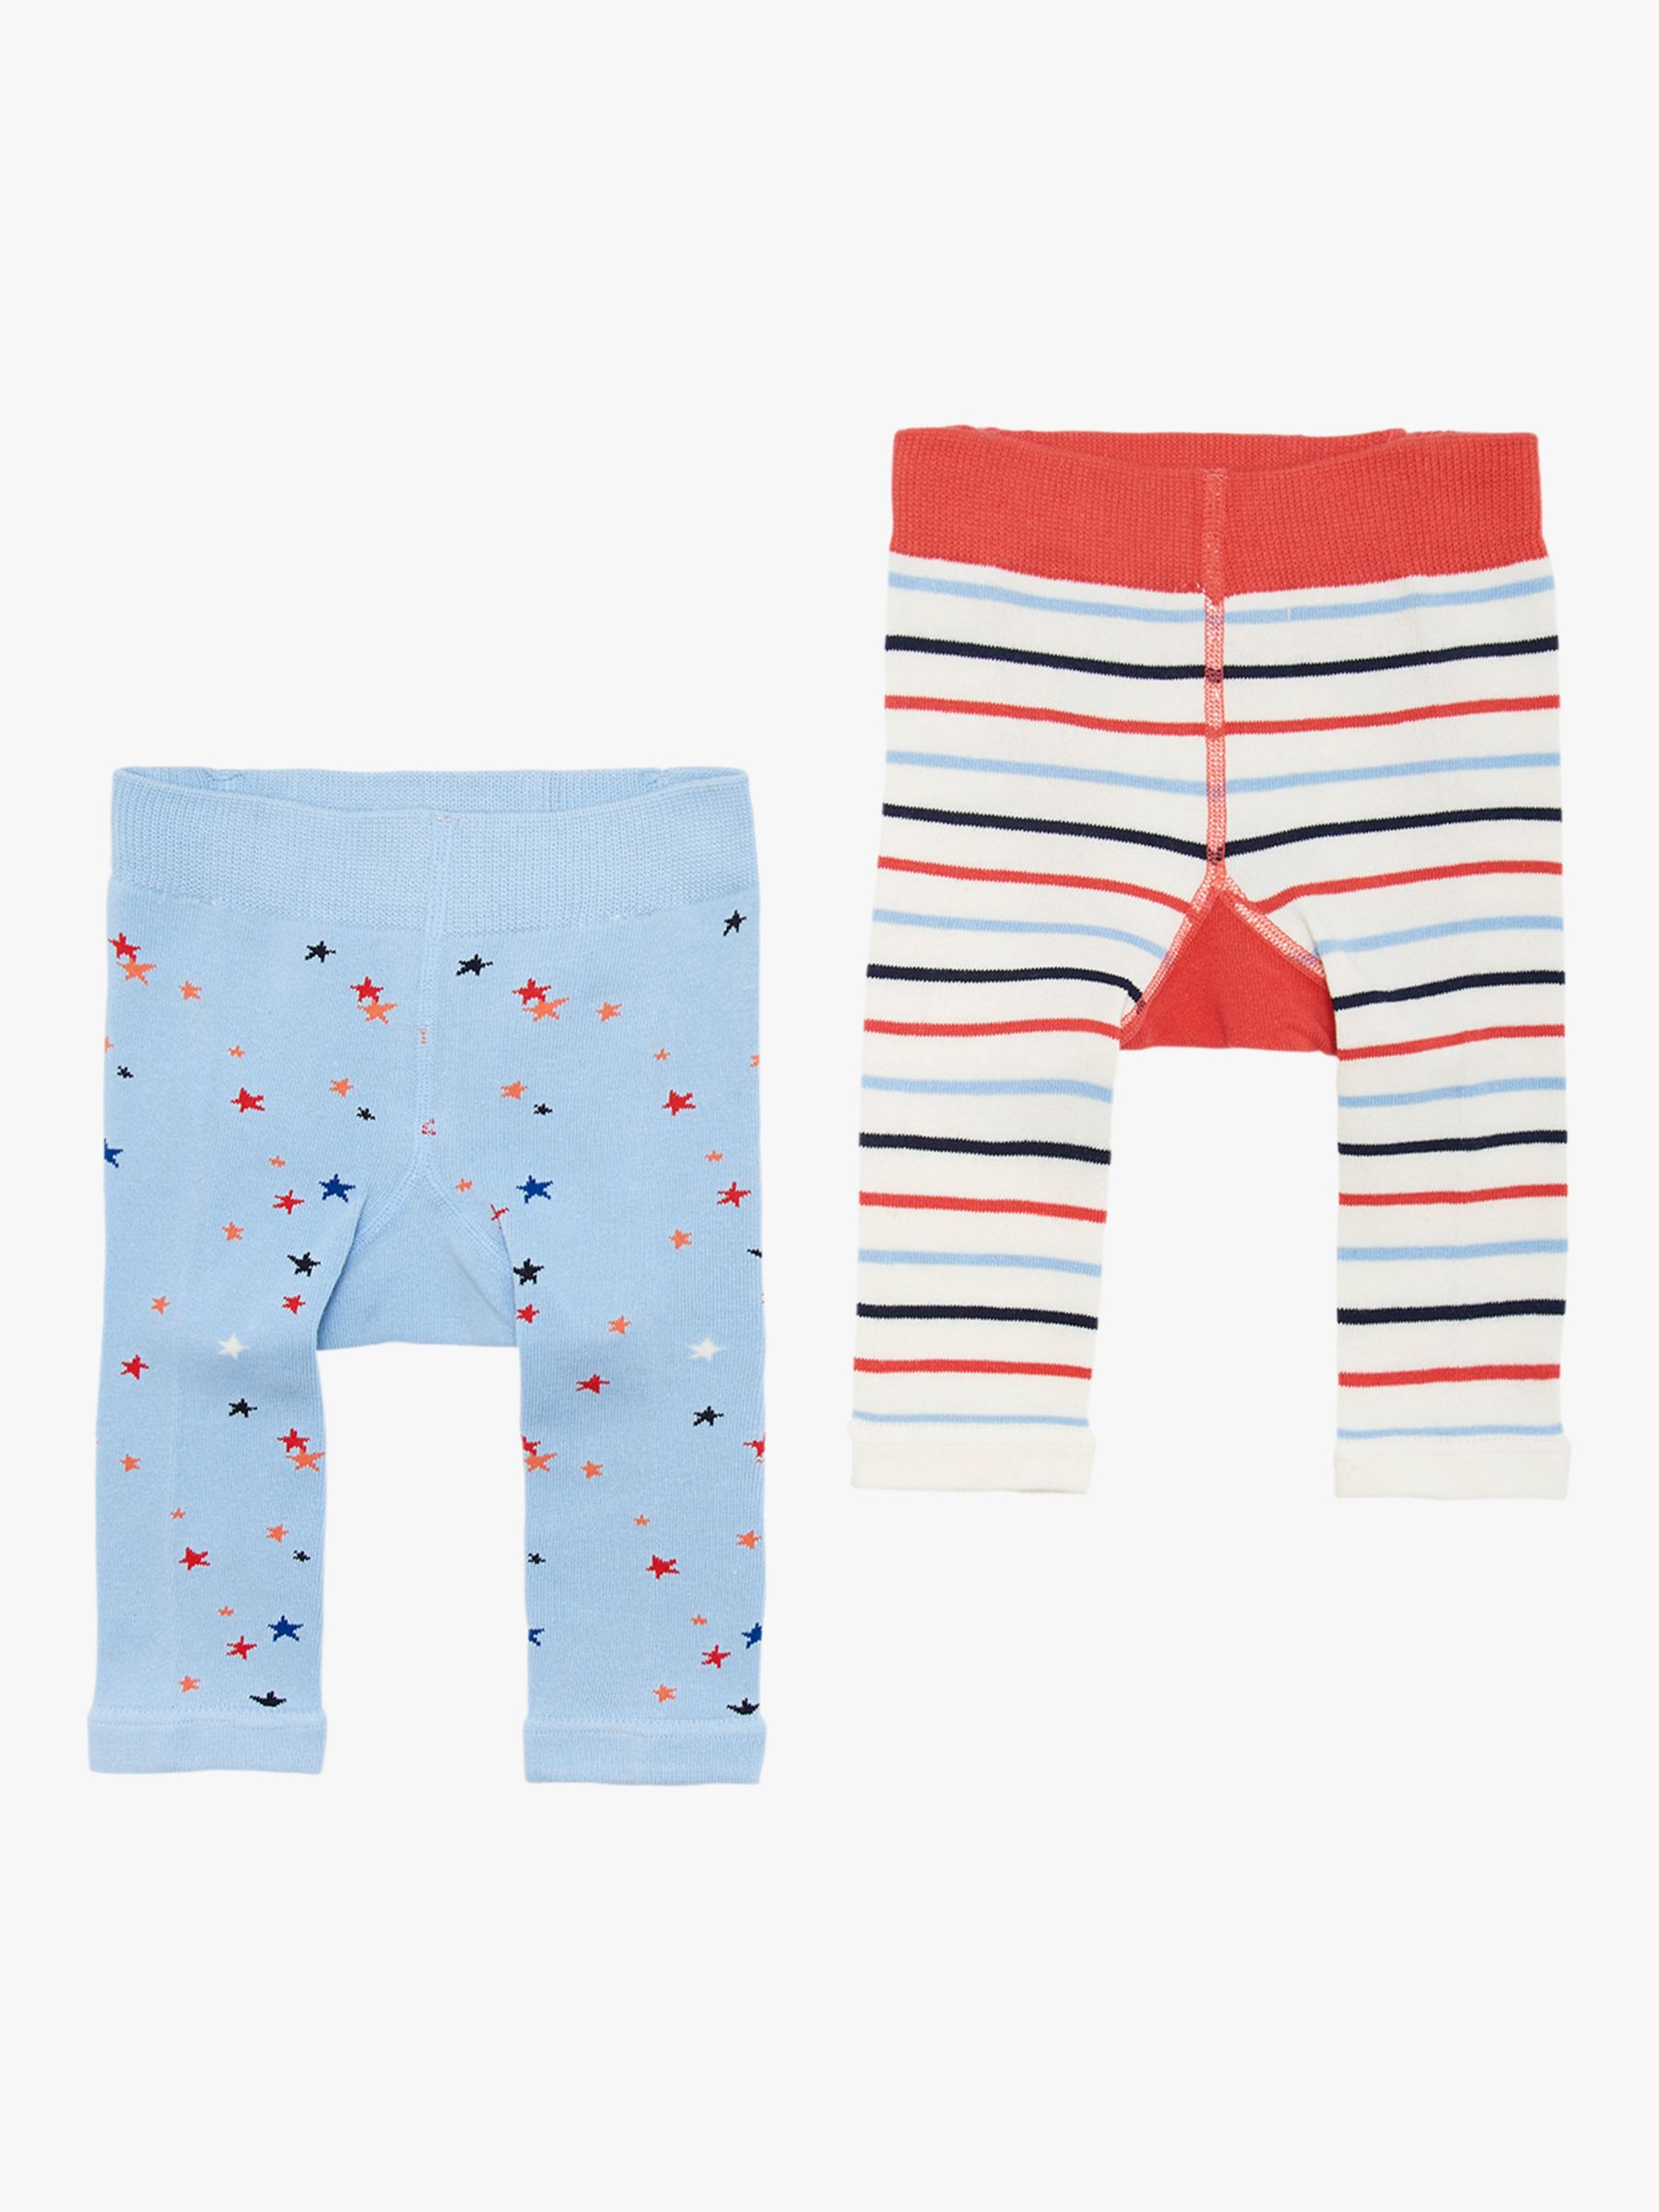 Little Joules Baby Lively Legs Polar Bear Tights, Pack of 2, Multi